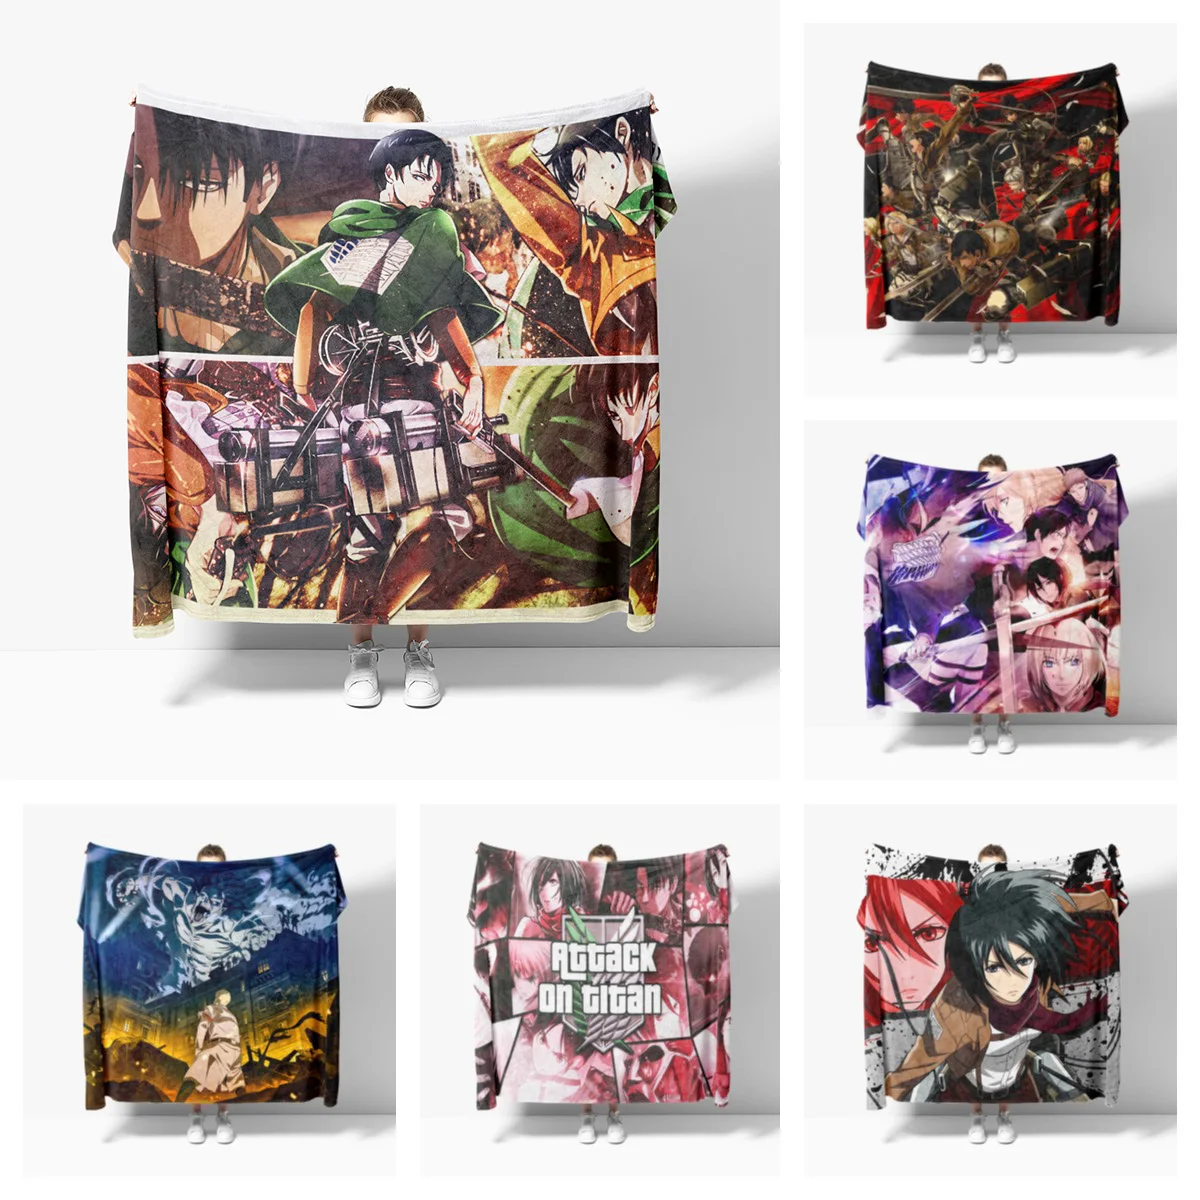 

3D Print Attack on Titan Blanket Soft Sofa Cover Throw Anime Levi Blanket Fleece Tapestry Warm Bed Blankets for Bedroom Couch